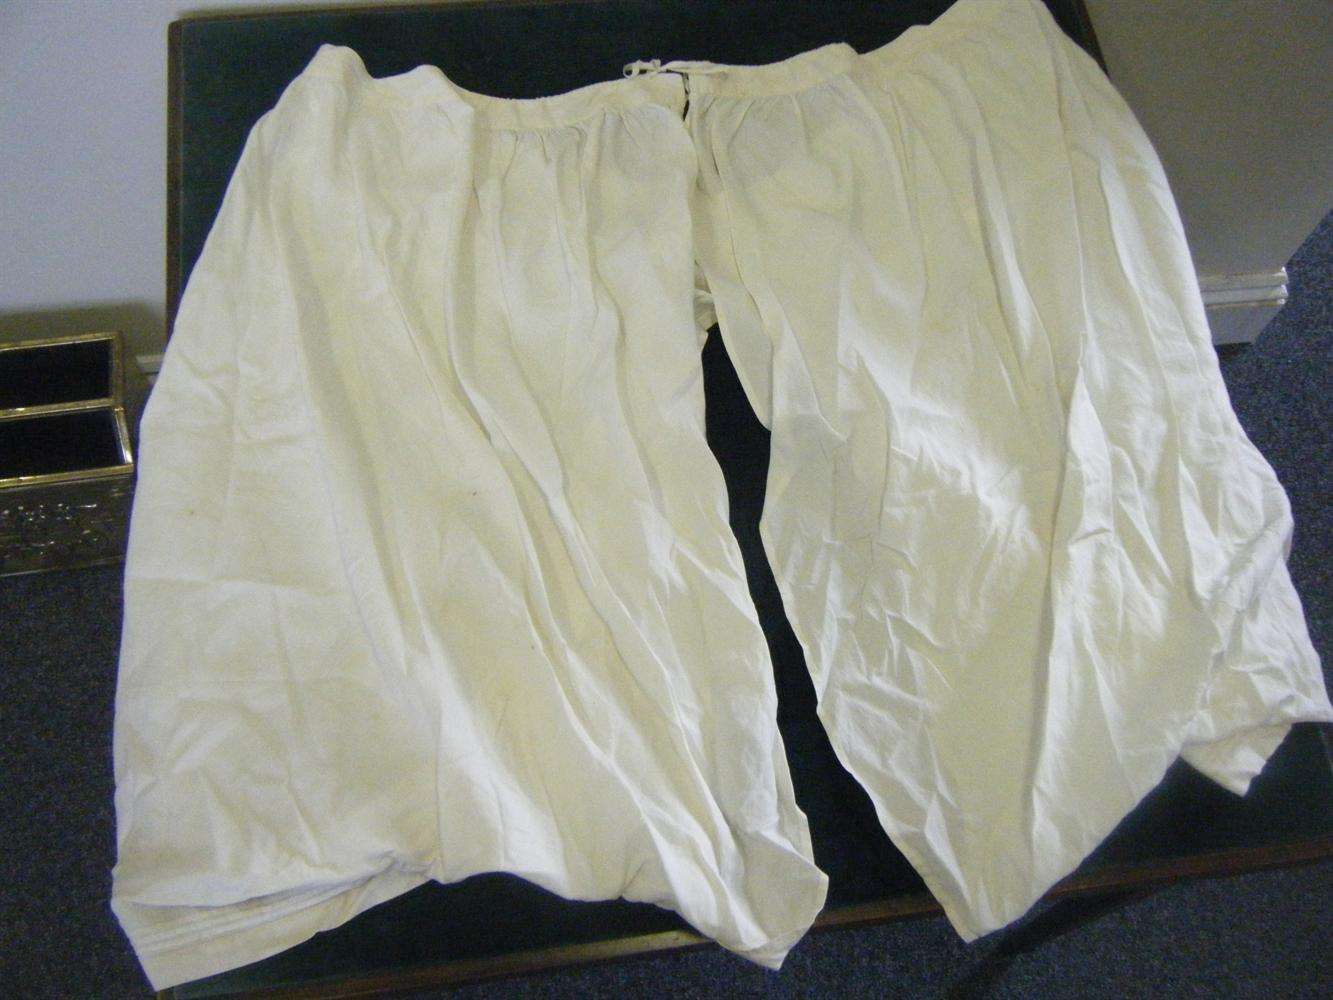 Bloomers and a chemise that belonged to Queen Victoria were sold at auction in Westenhanger